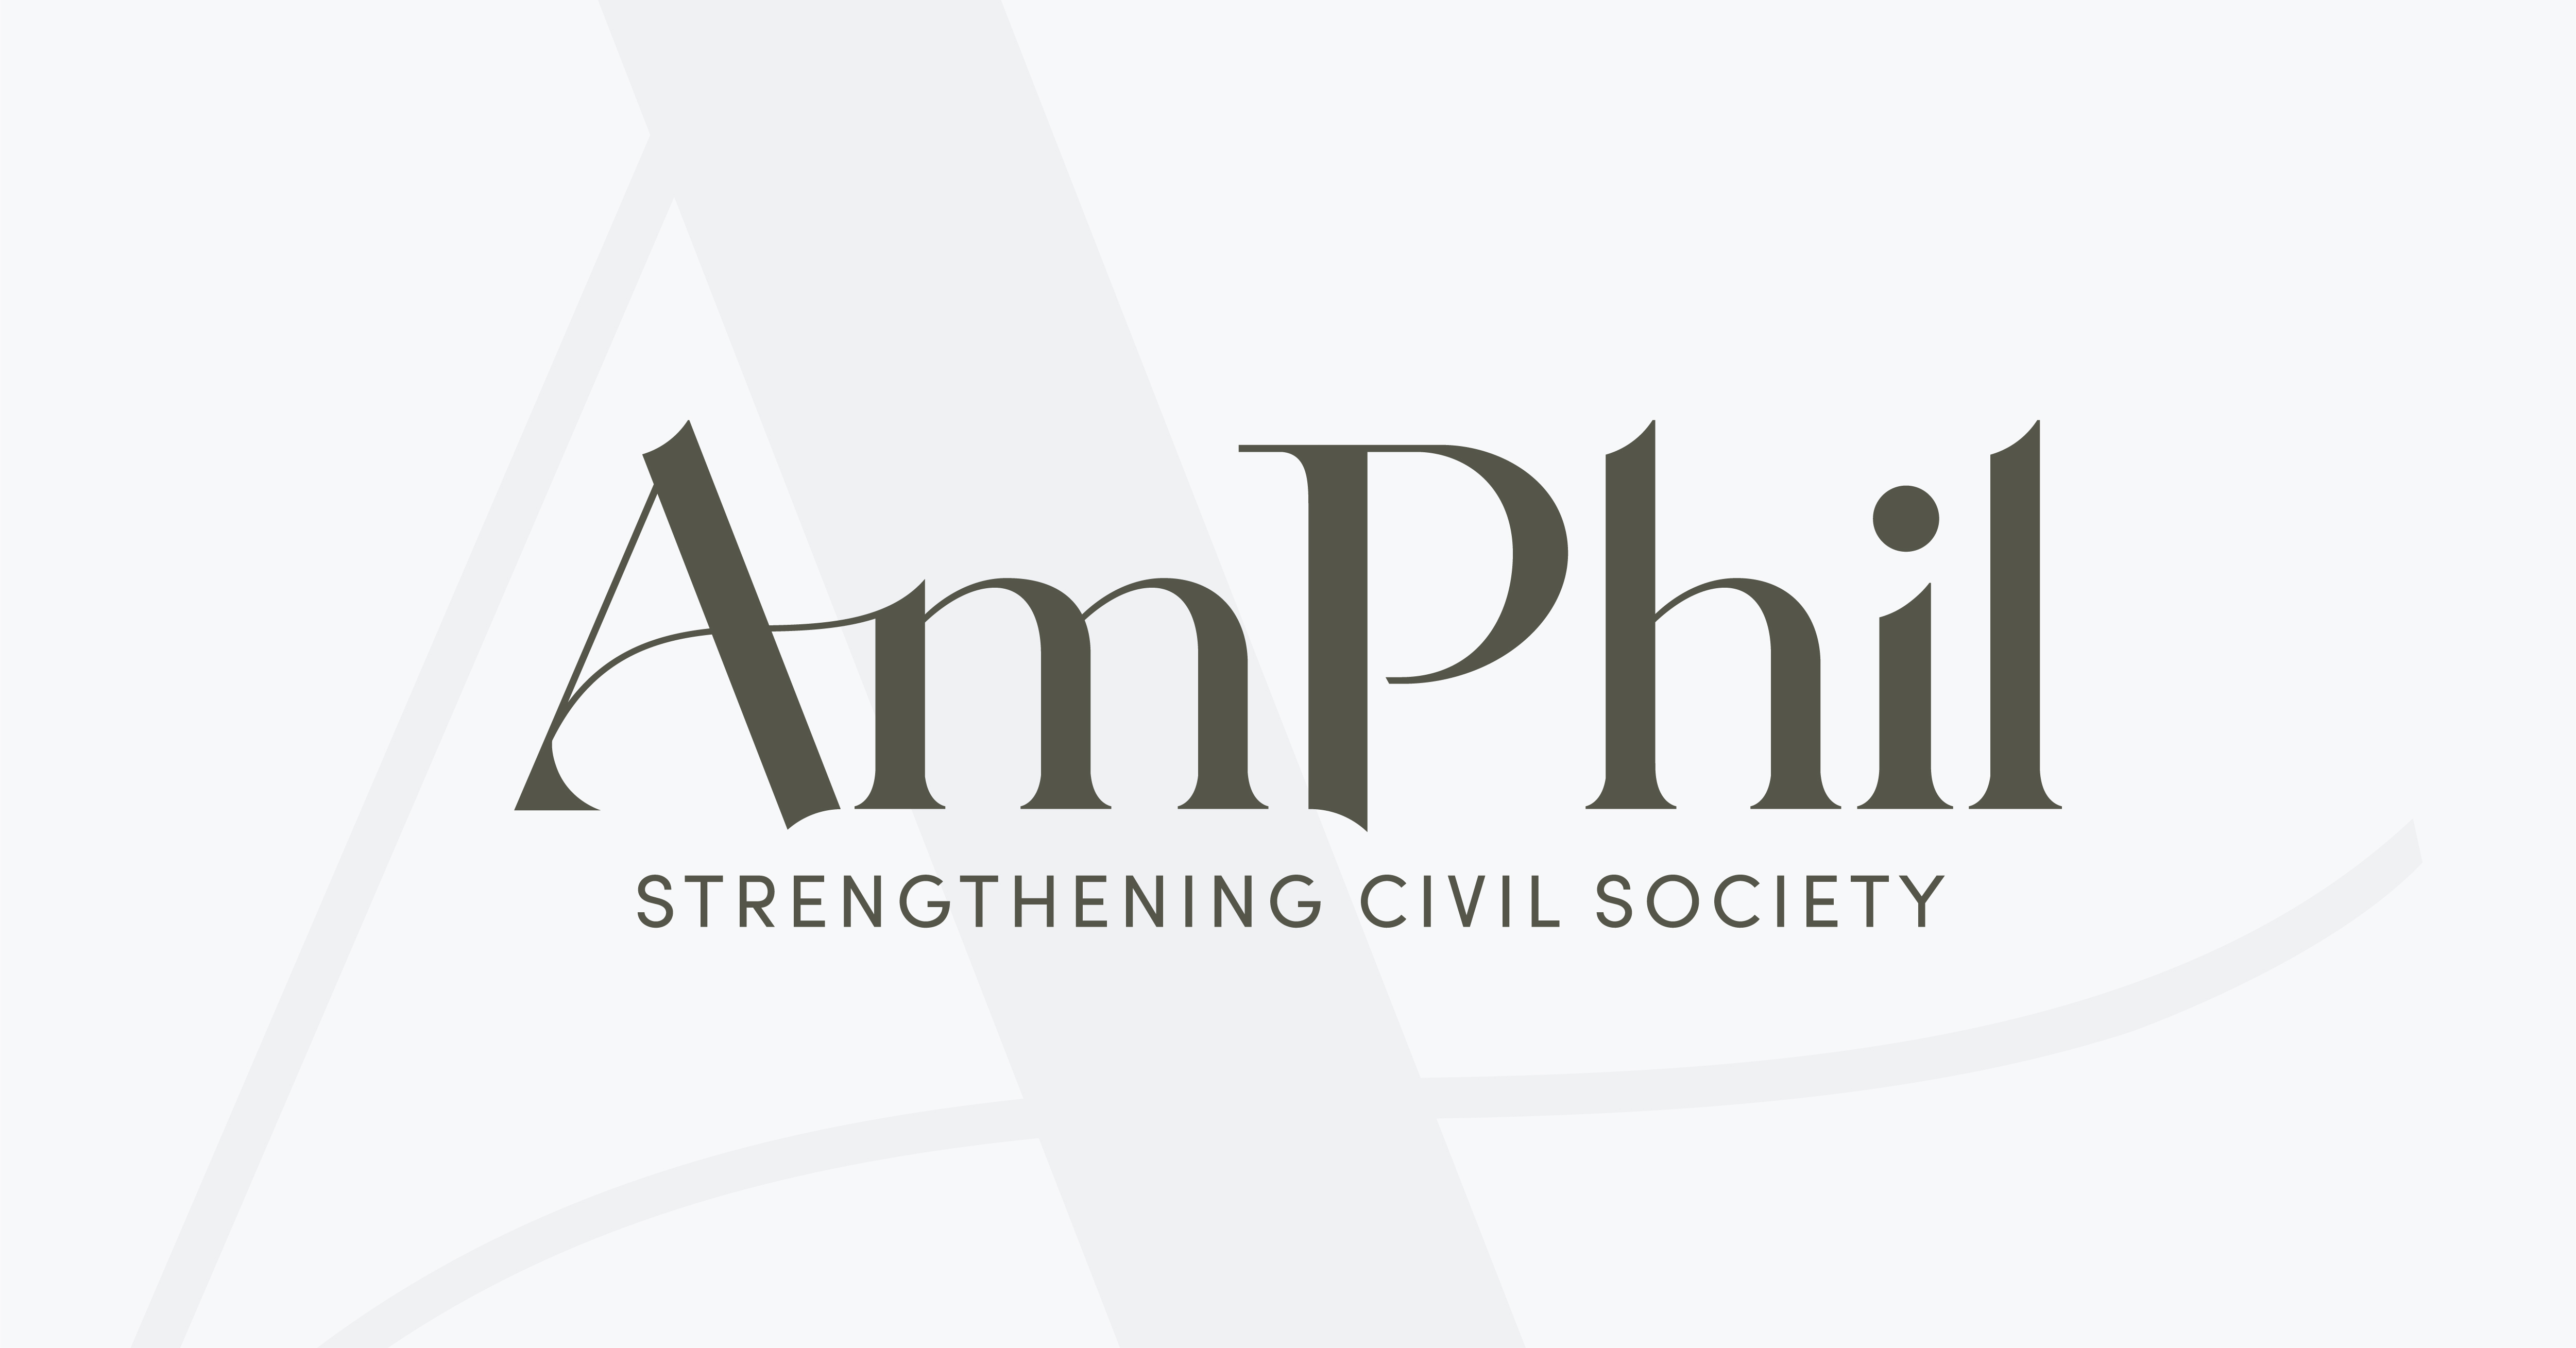 Best nonprofit fundraising consultant American Philanthropic updates their name to AmPhil in a logo image